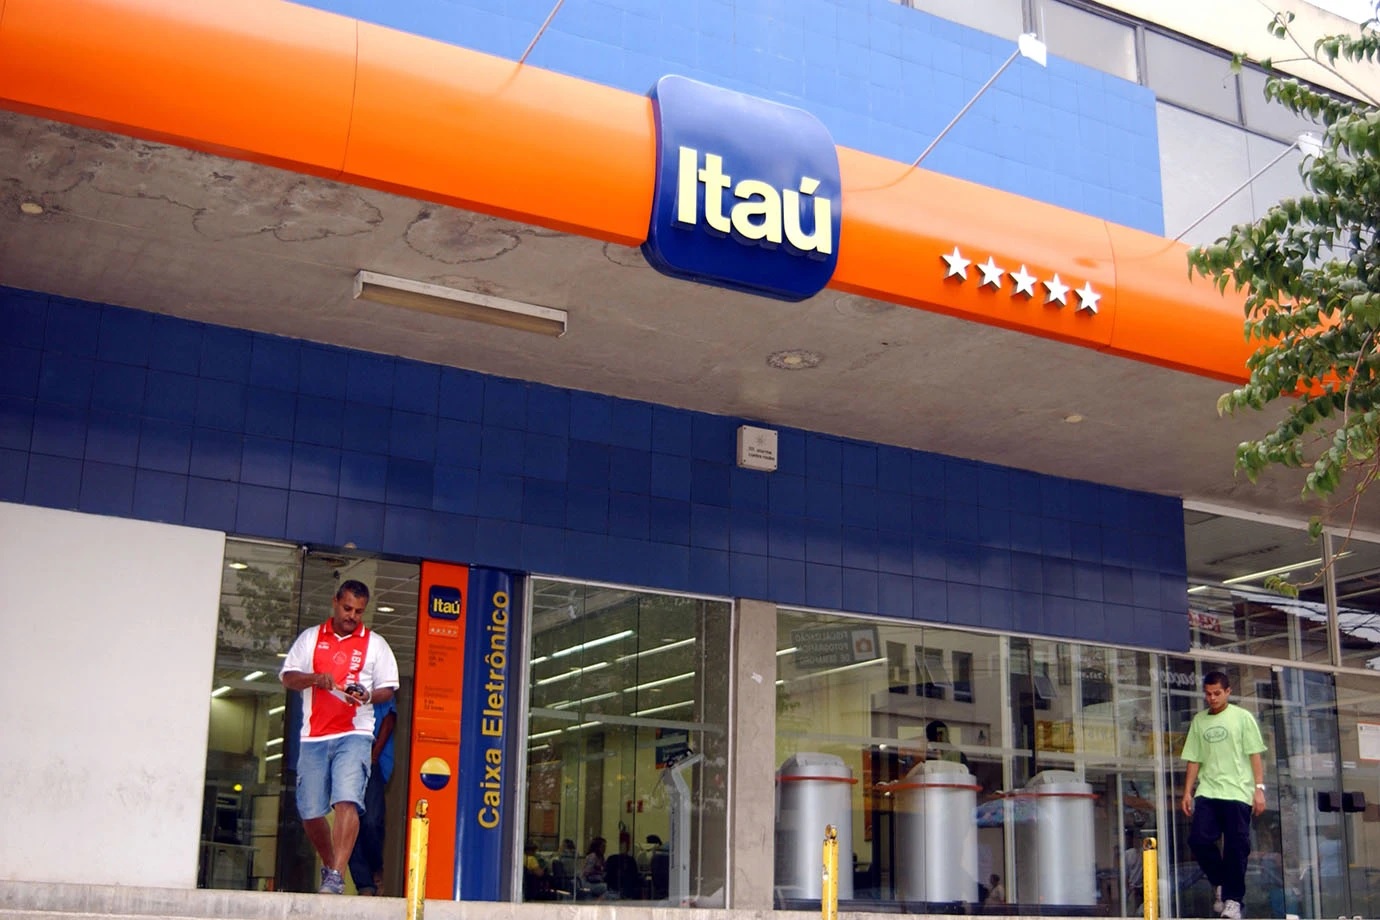 Itaú appears in first place on the list, with a value of R$36.4 billion (US$7.1 billion). The bank had an increase of 28.5% compared to 2021.